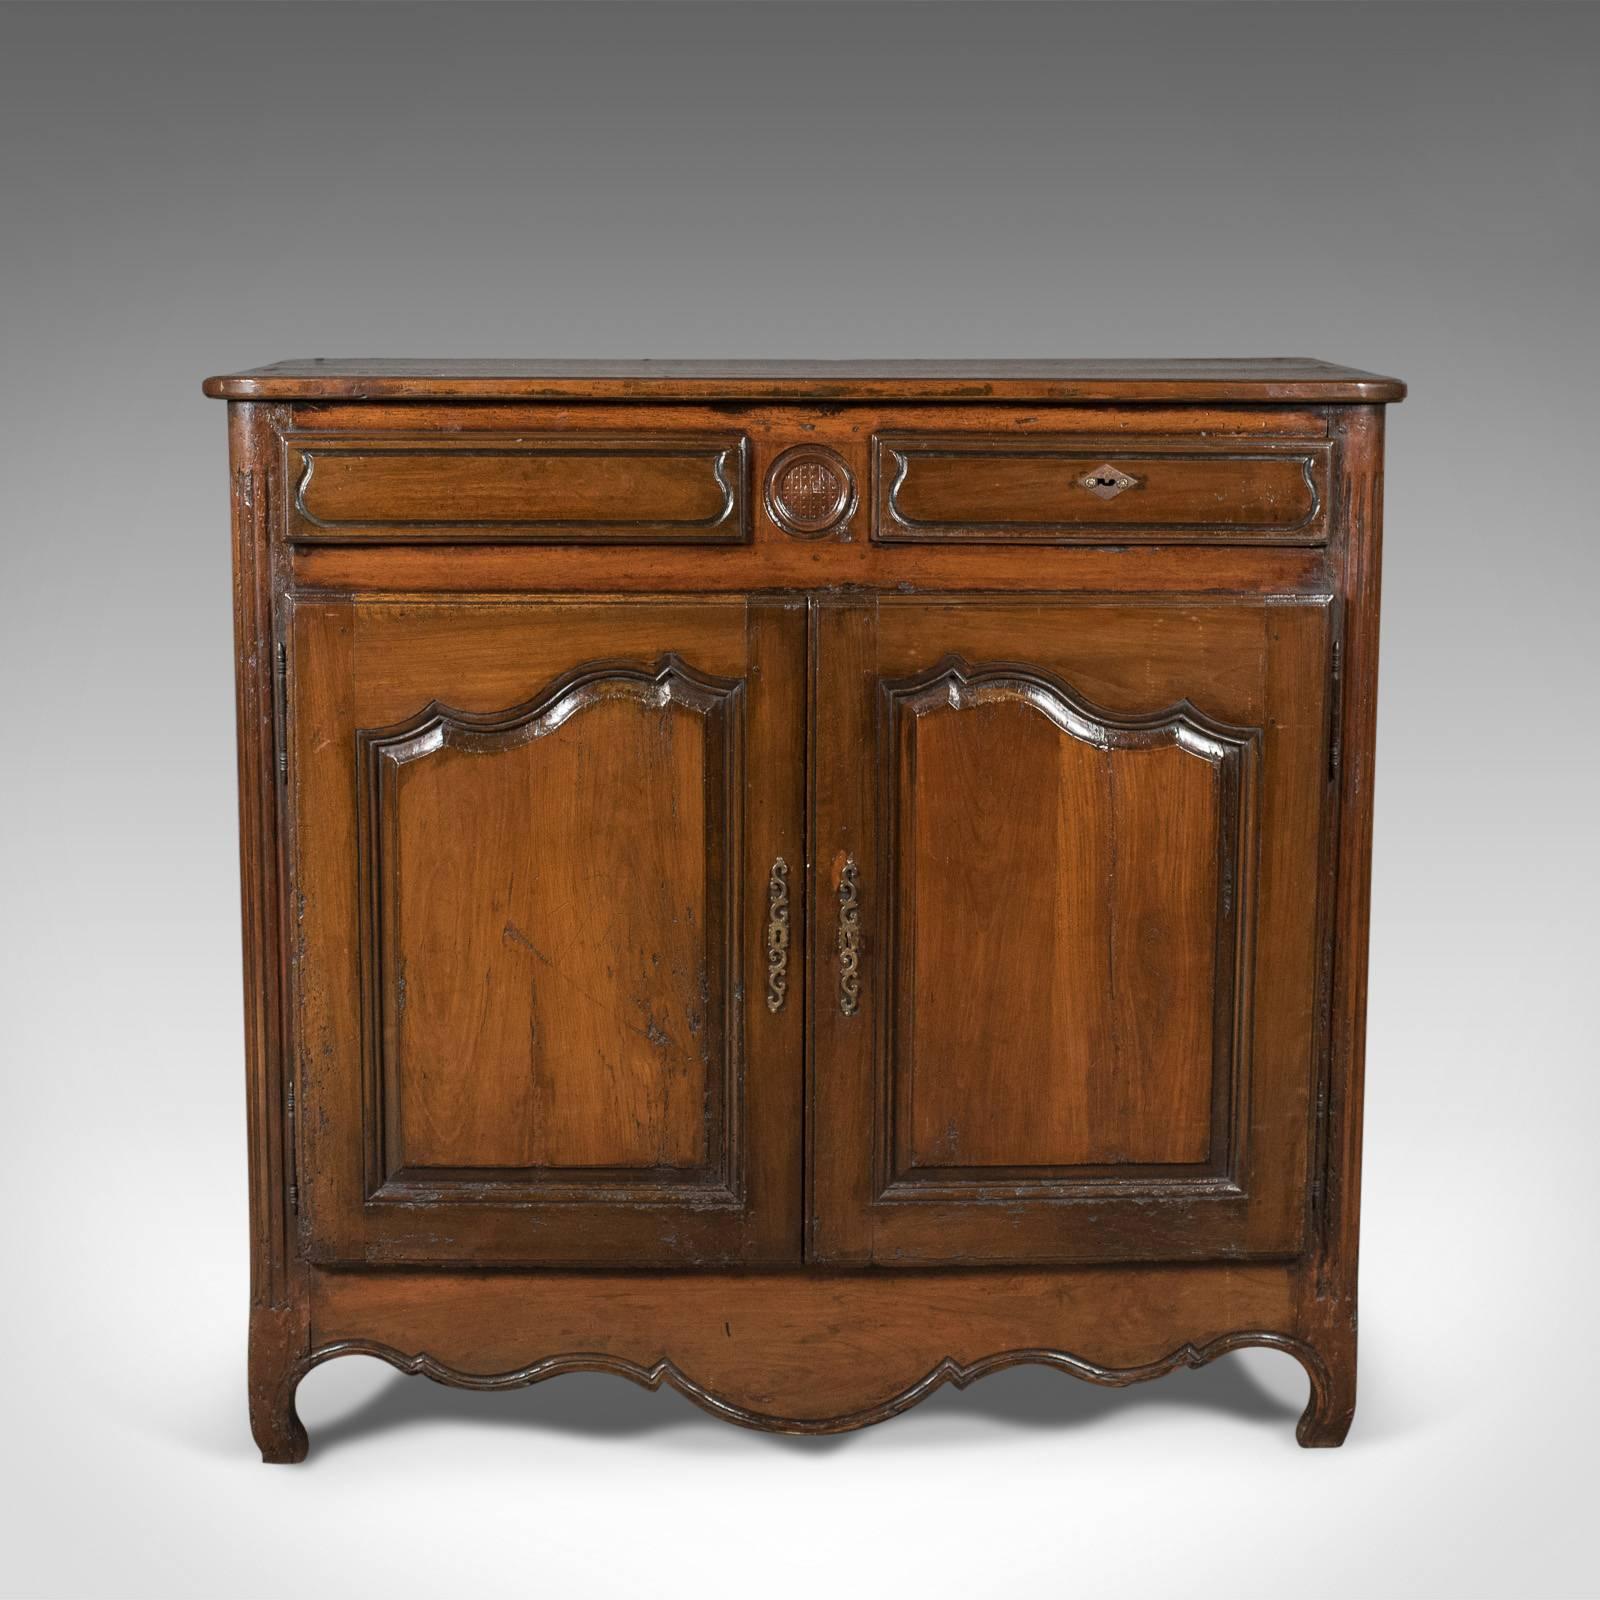 This is a French antique sideboard cabinet from the late 18th century, a walnut cupboard, circa 1780.

Attractive color to the walnut with an appealing aged patina
Two plank top with moulded edge detail
Rounded, fluted corners descending to